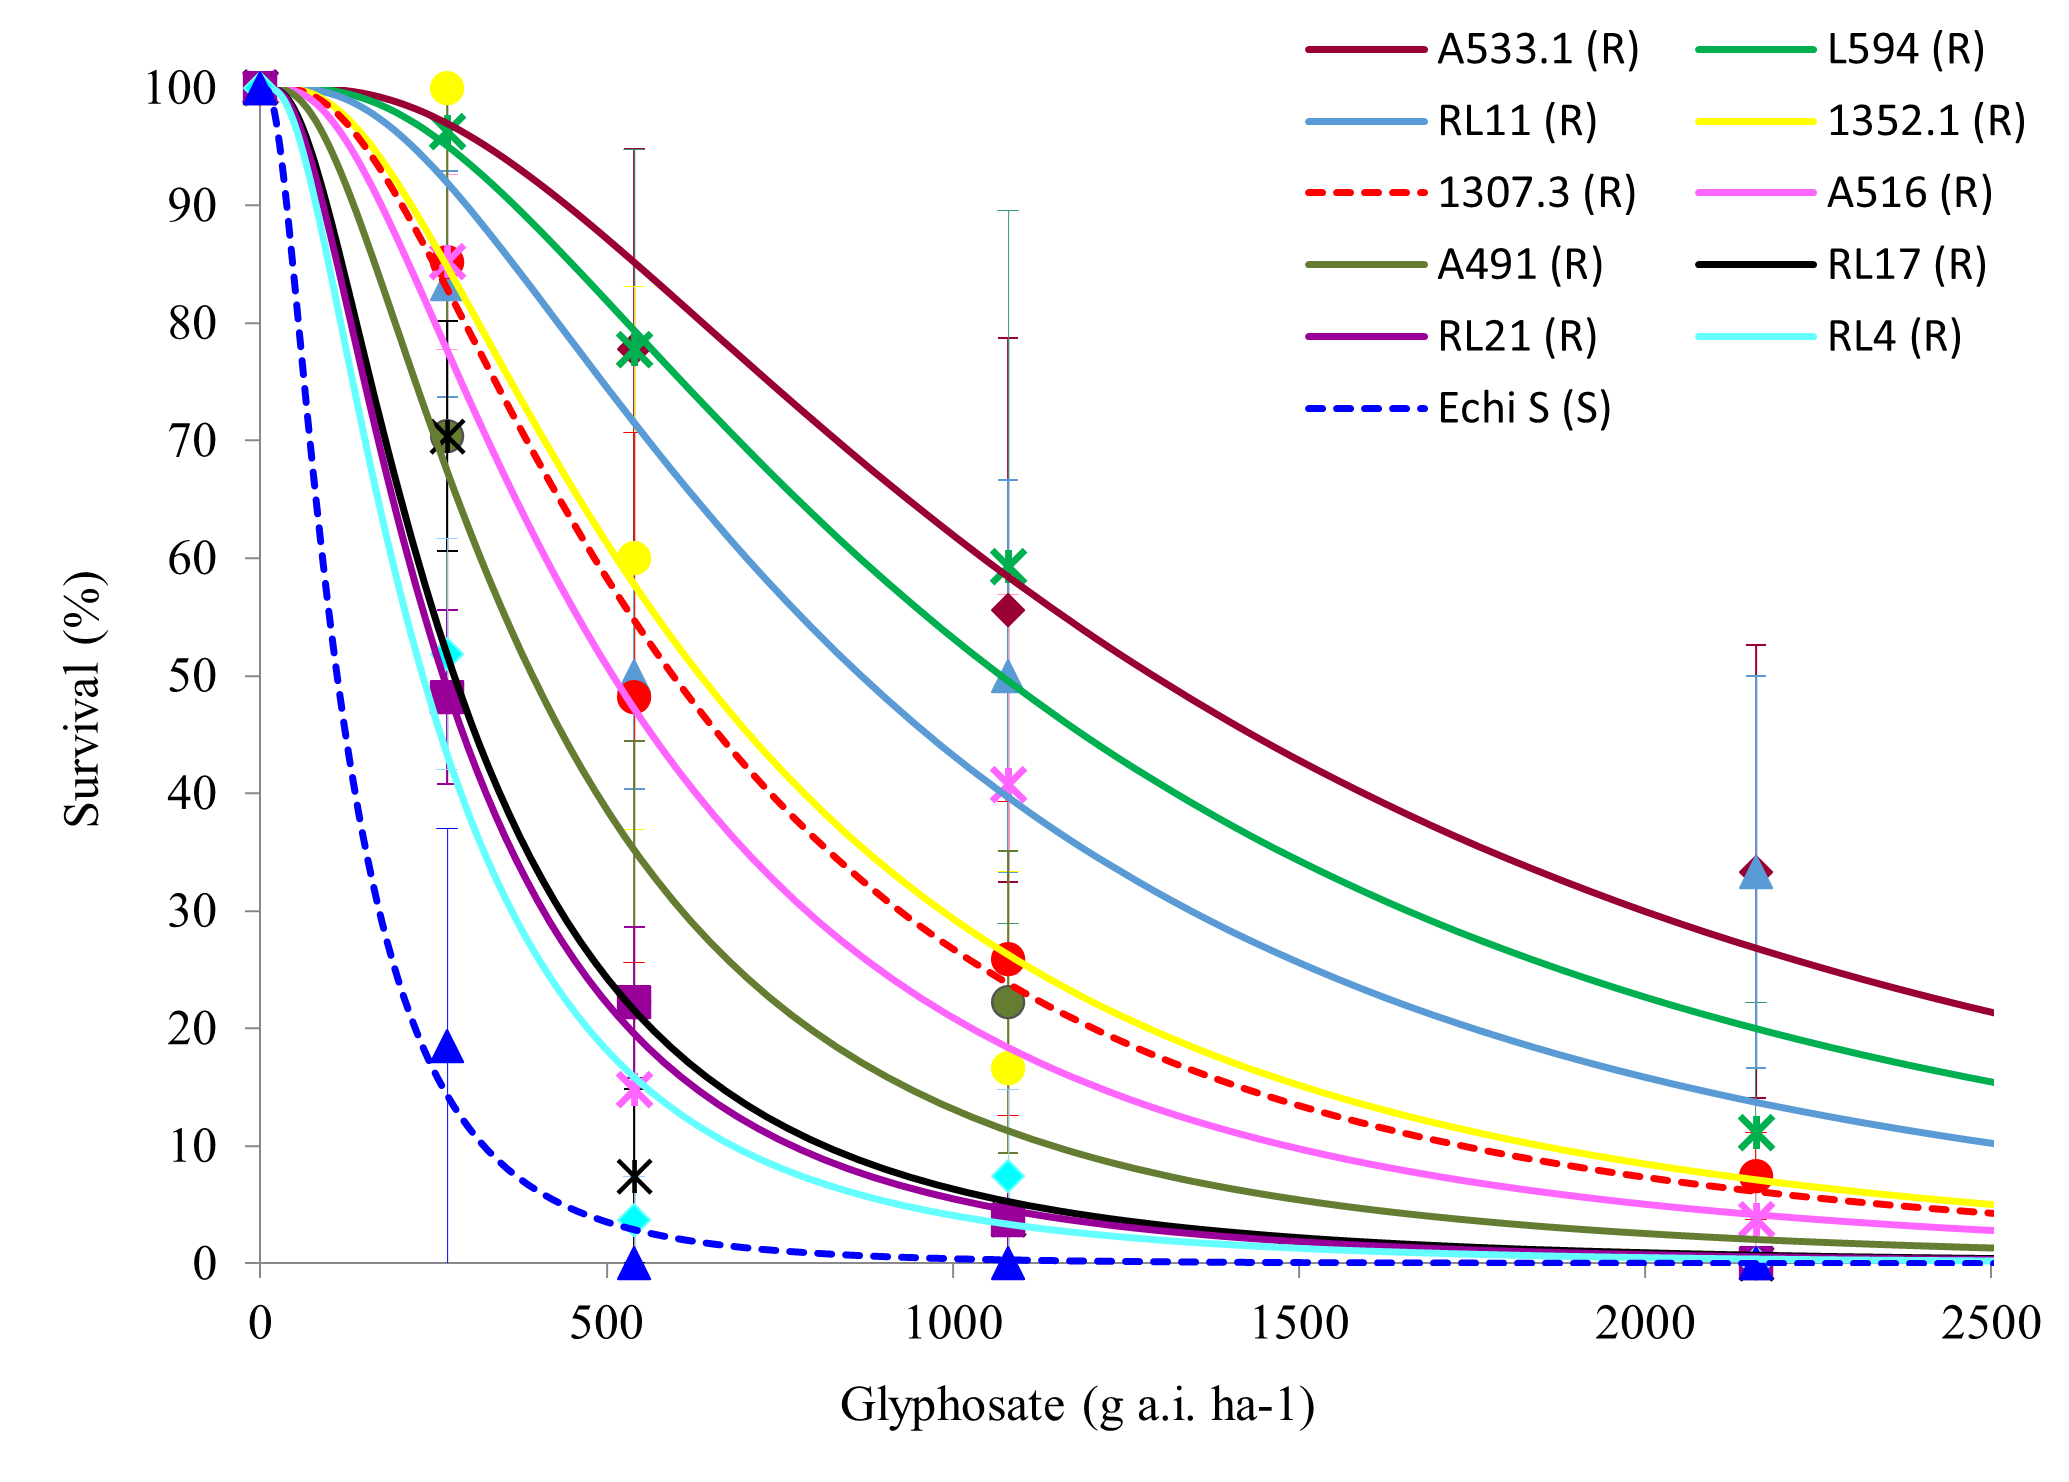 This coloured line graph shows the response of 10 resistant awnless barnyard grass biotypes to increasing rates of glyphosate (The University of Adelaide). ‘Echi S’ is the susceptible control population.